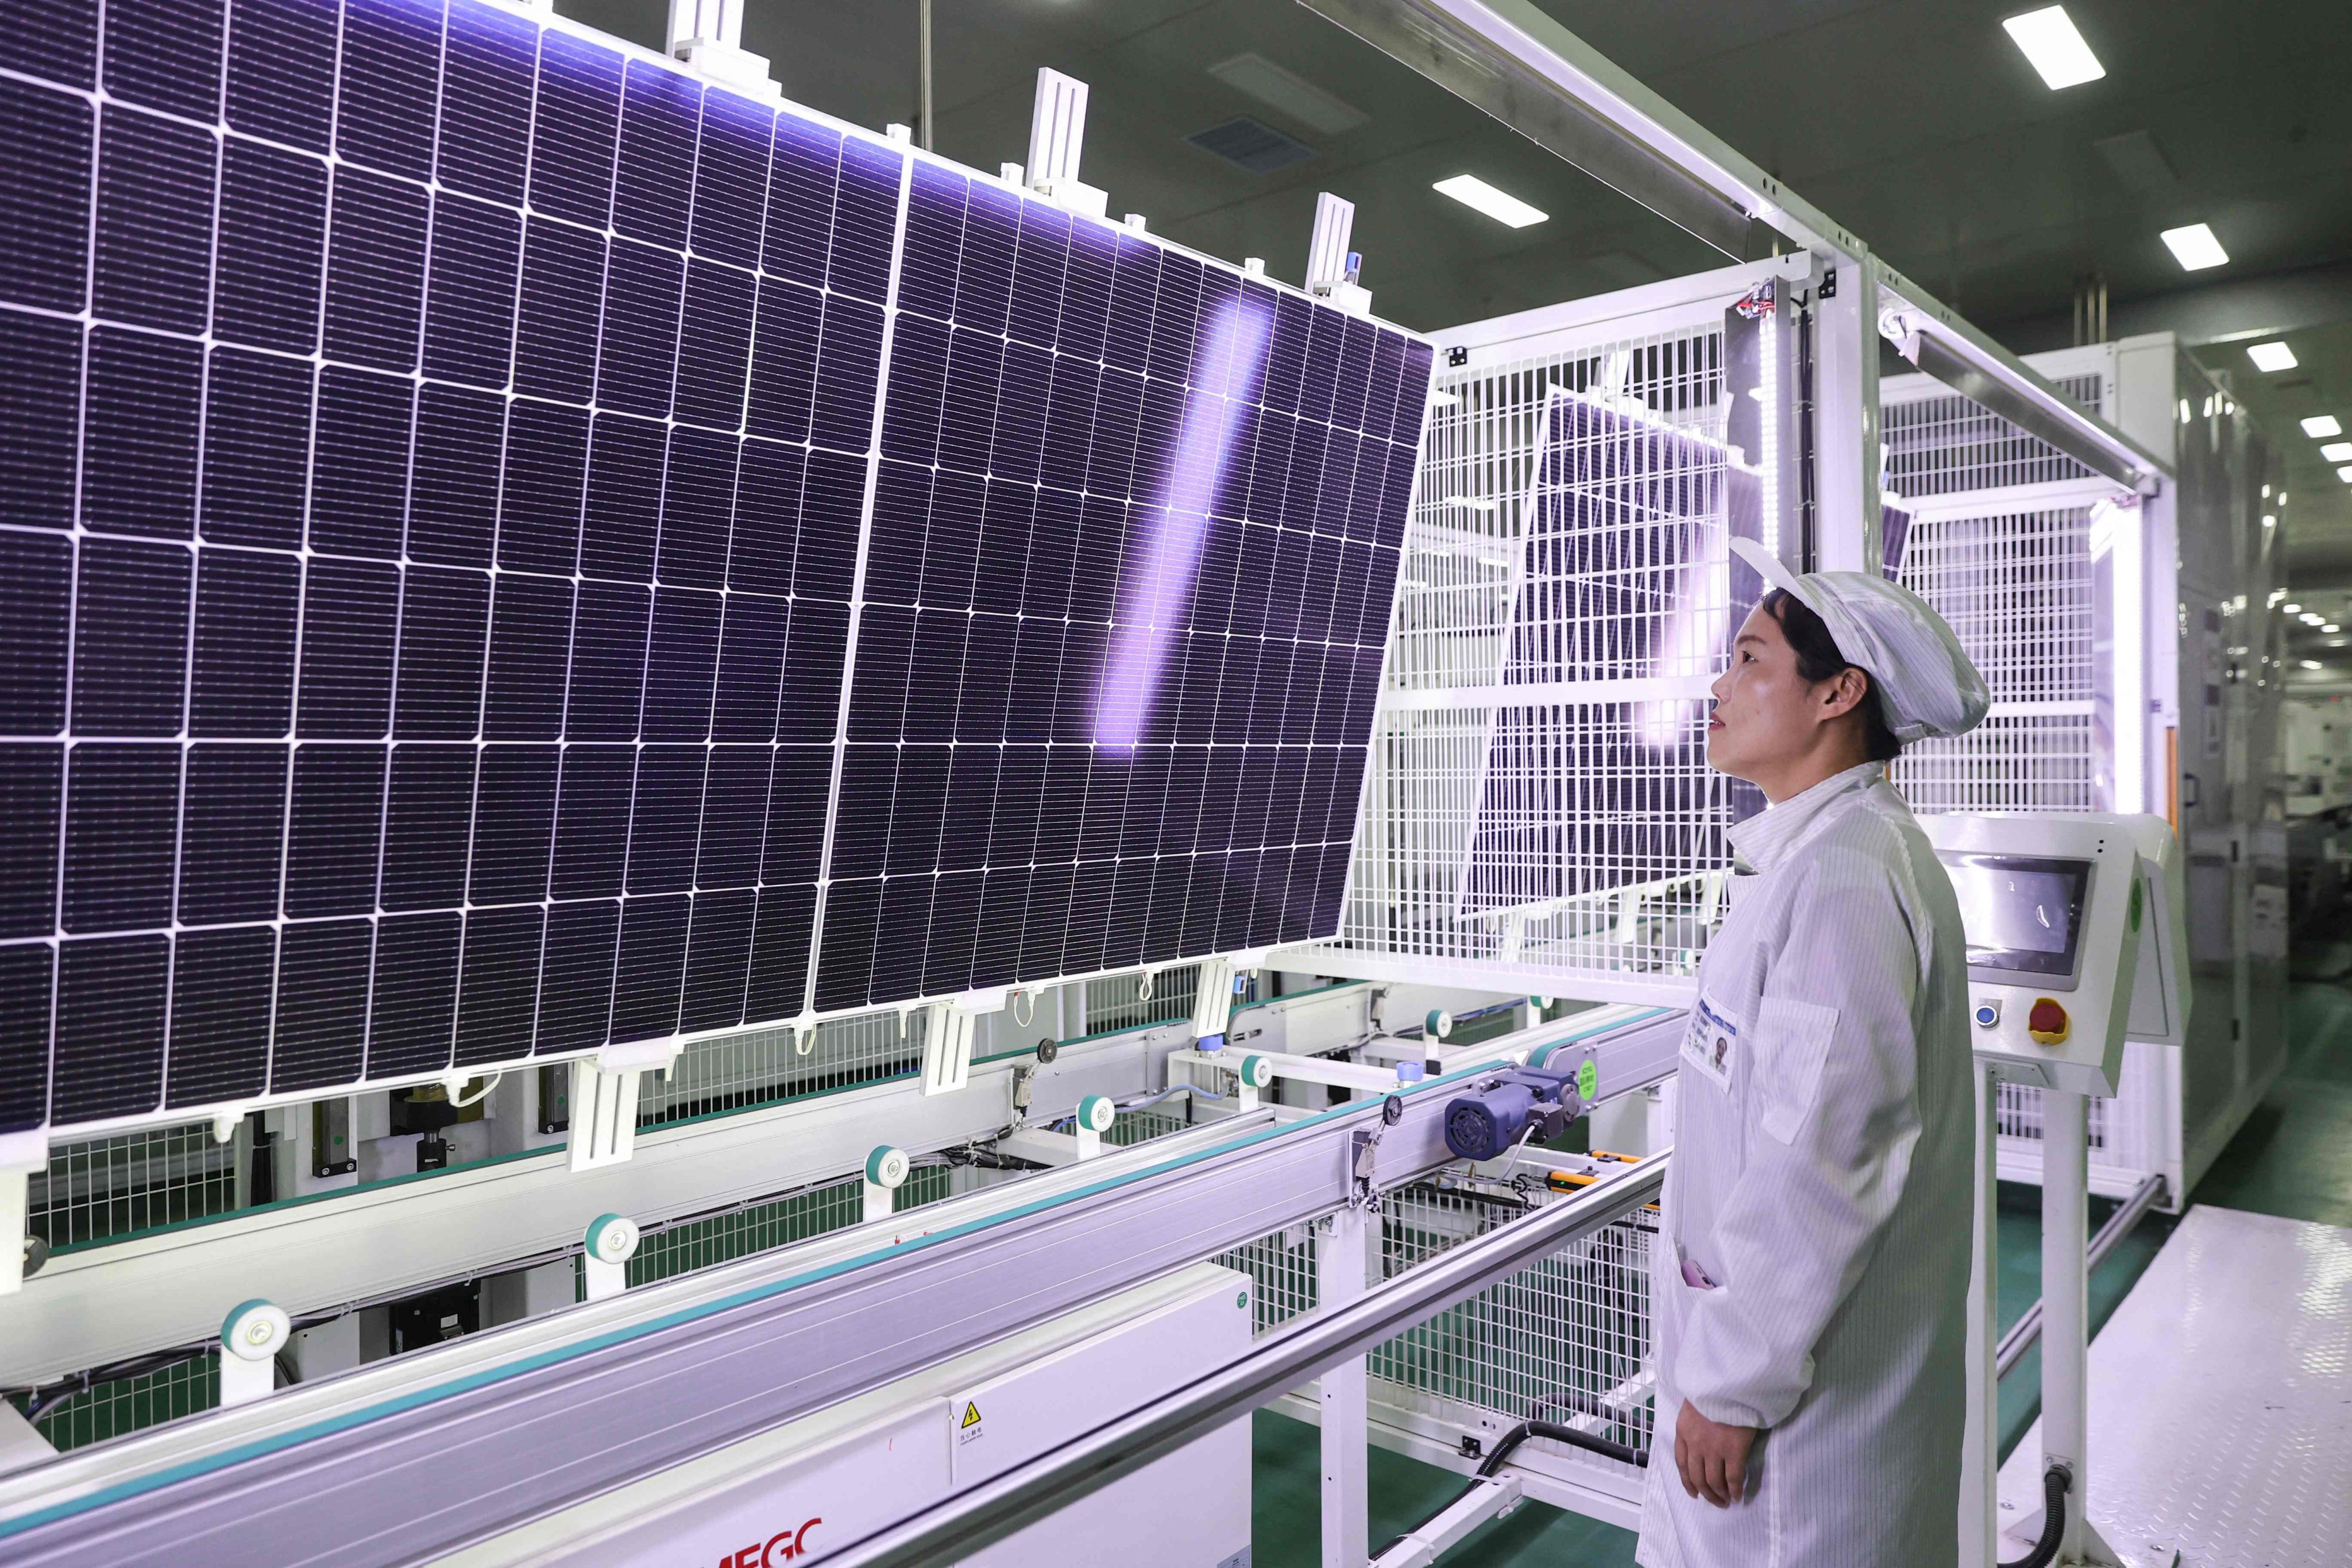 An employee works on solar photovoltaic modules at a factory in Lianyungang, in China’s eastern Jiangsu province. New flexible silicon solar cells developed by a Chinese-led team are significantly thinner and lighter than their conventional counterparts, and boast high power efficiency. Photo: AFP